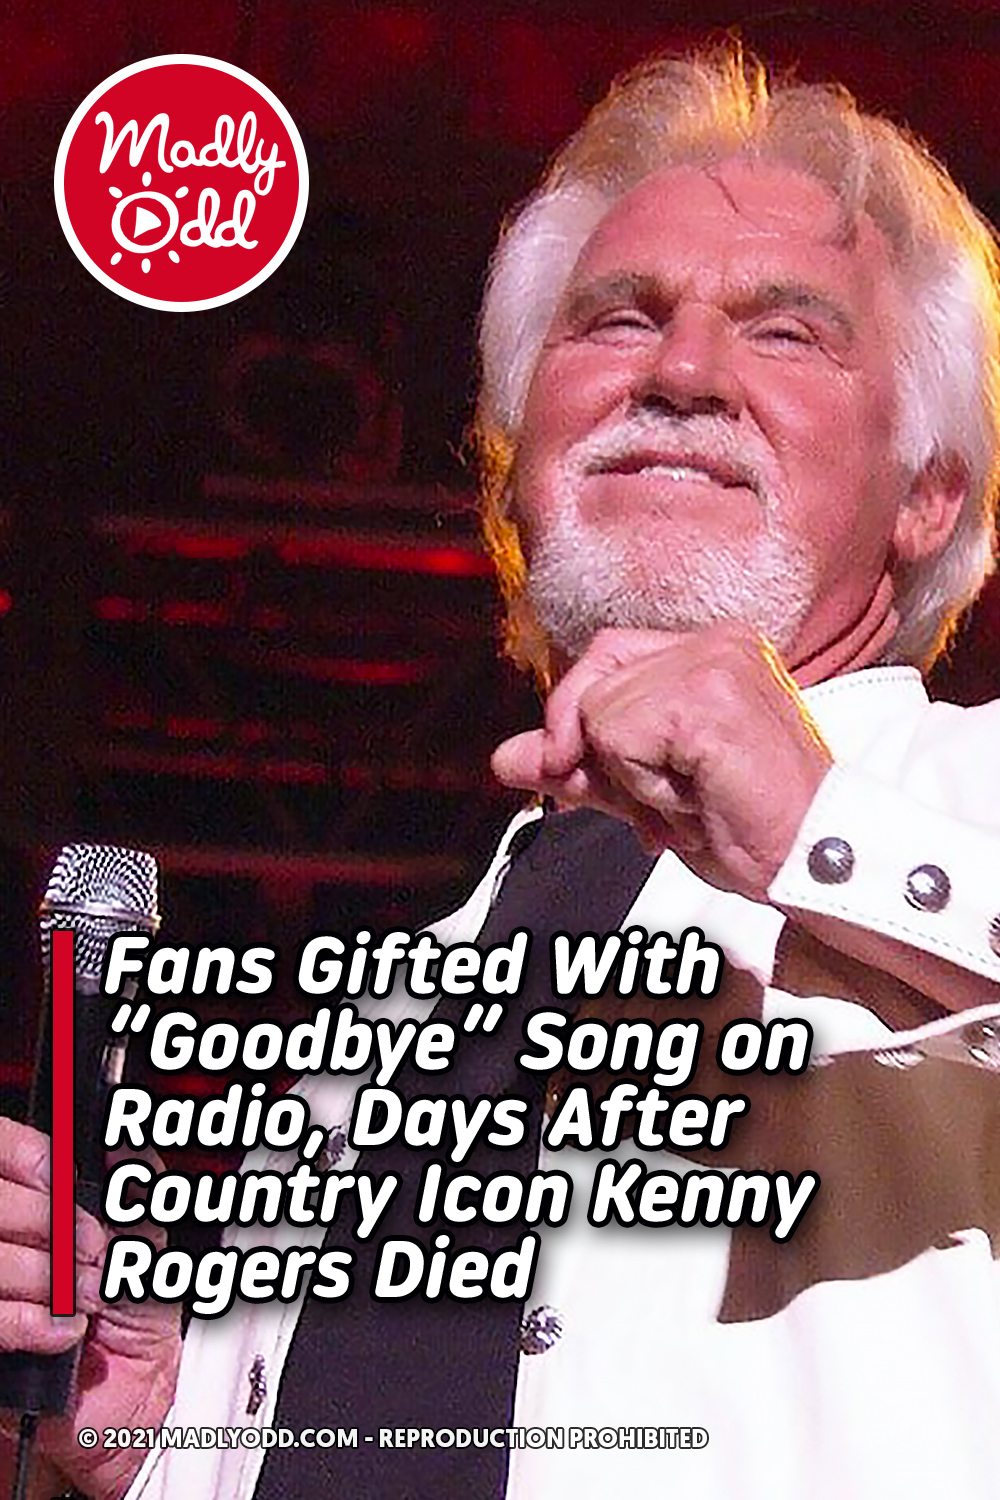 Fans Gifted With “Goodbye” Song on Radio, Days After Country Icon Kenny Rogers Died